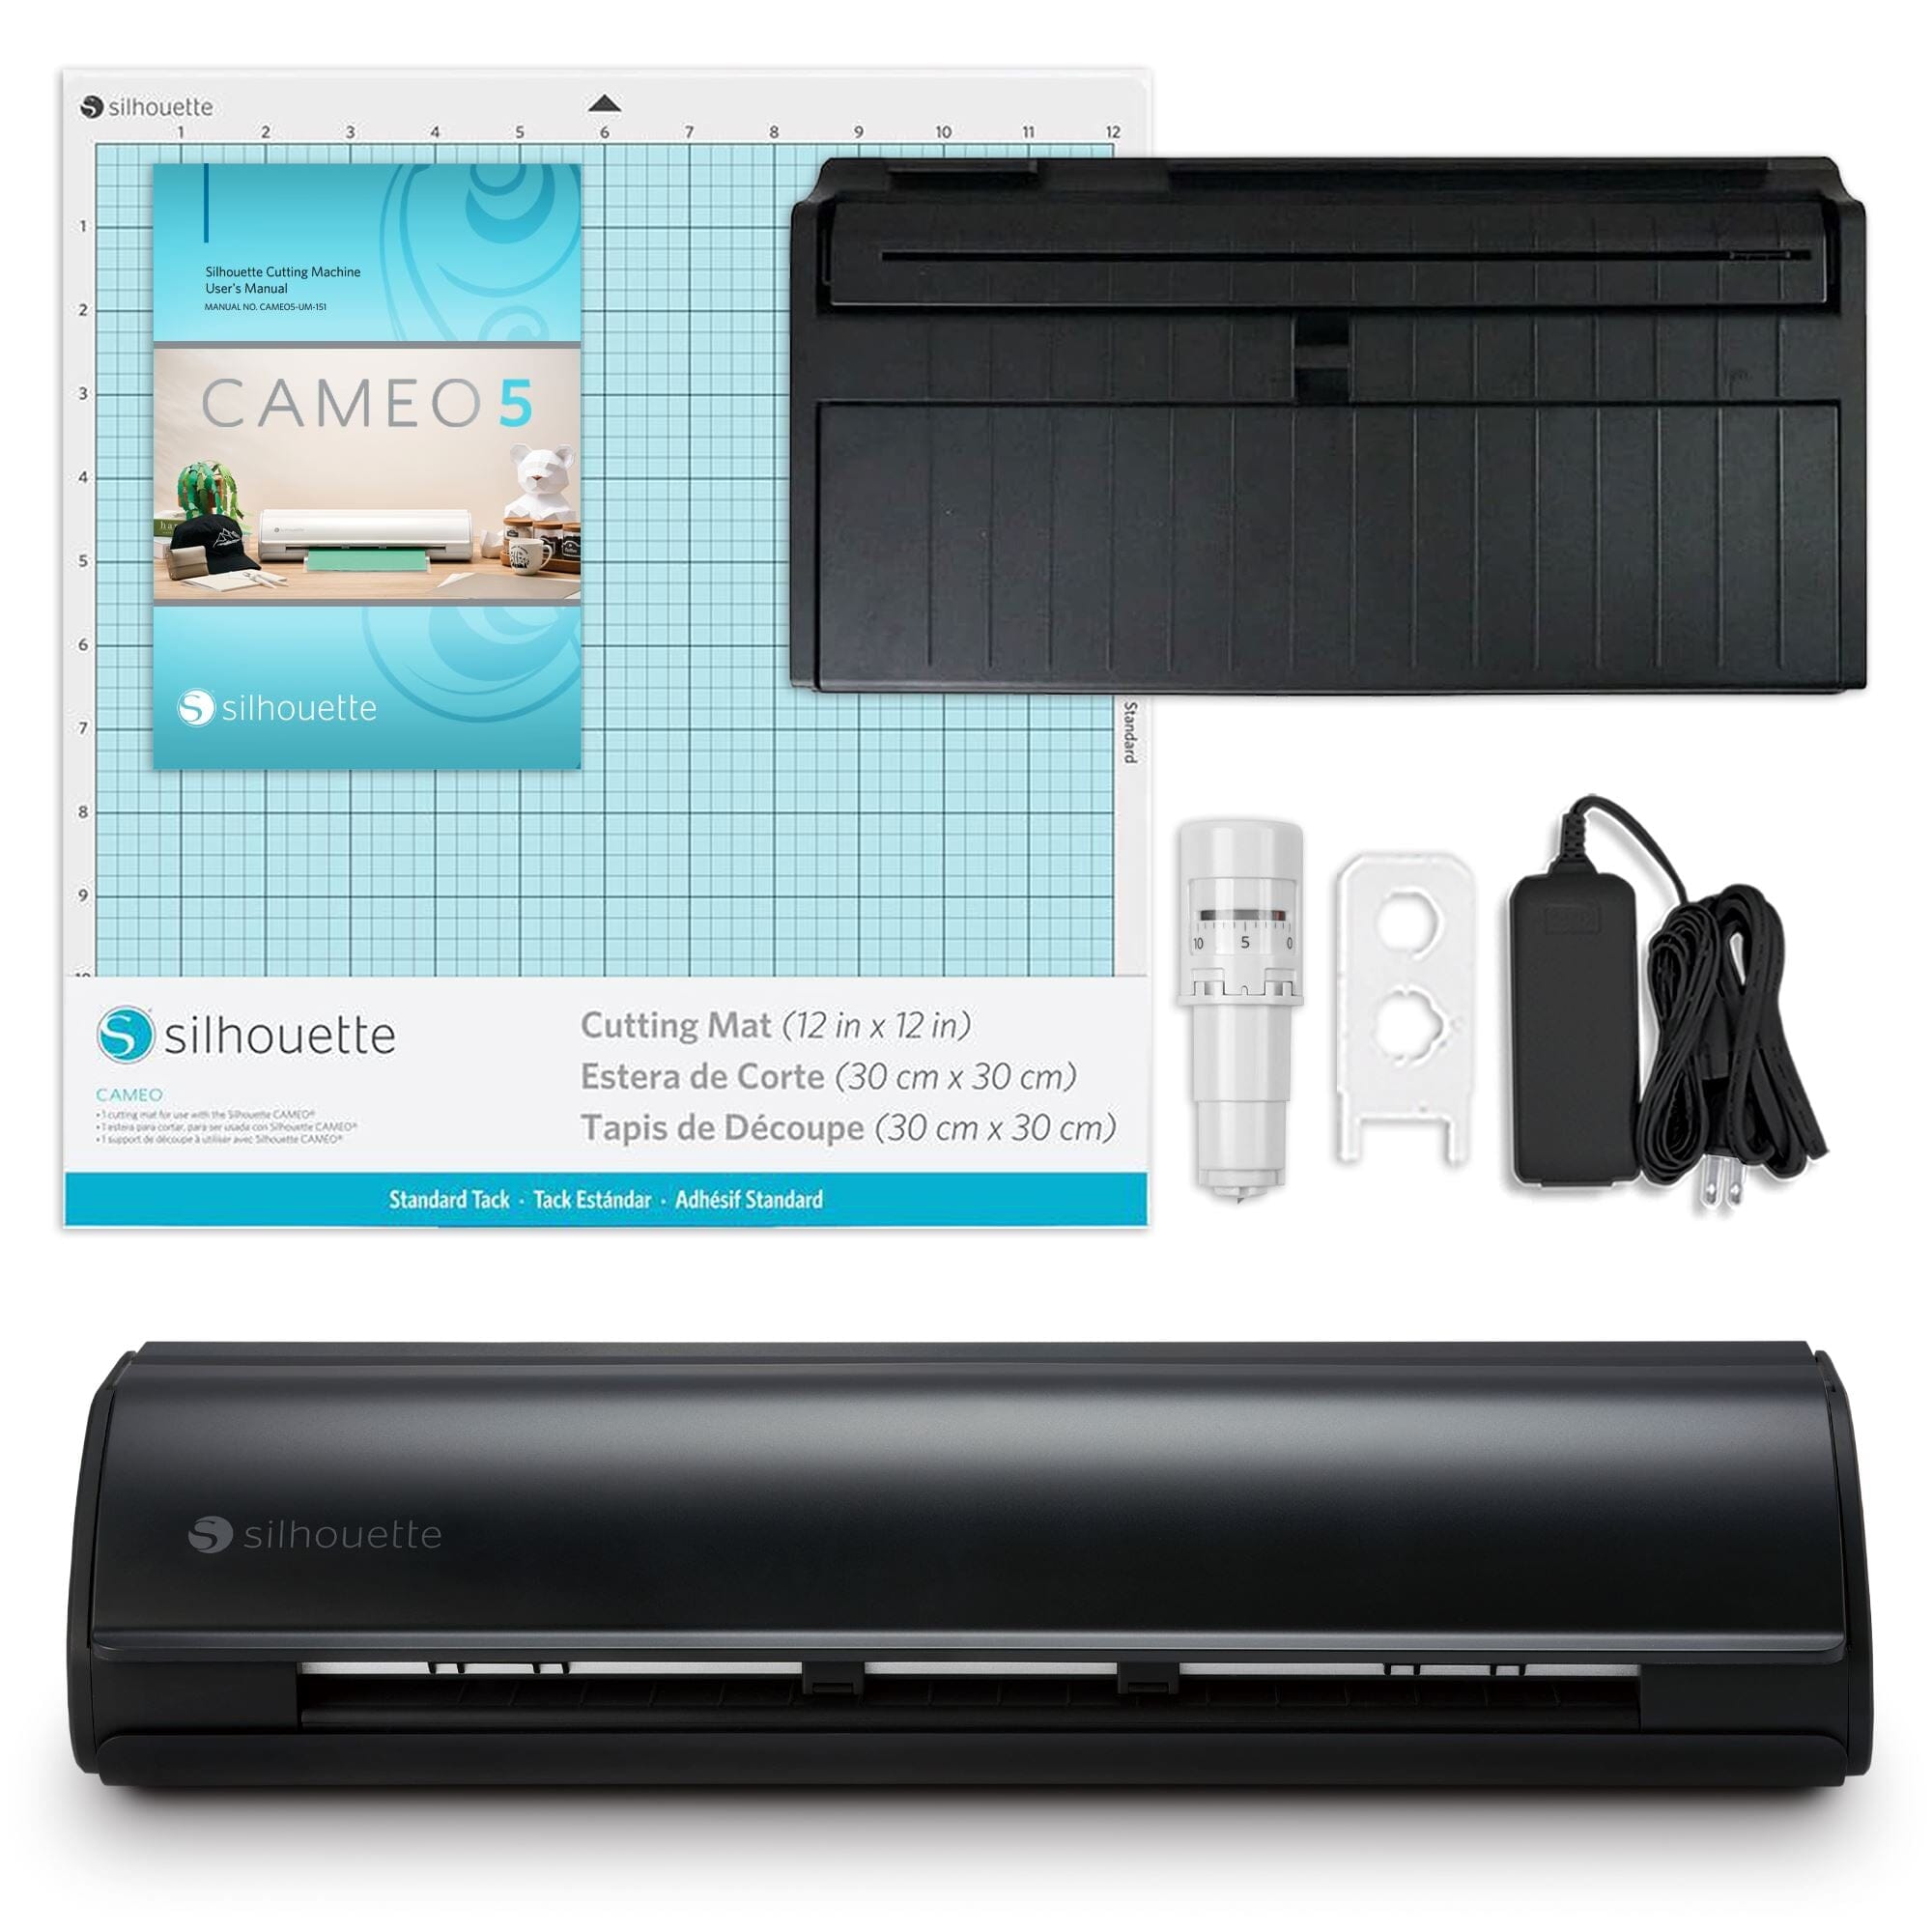 Silhouette Black Cameo 5 w/ Deluxe Blade & Tool Pack, Mat Pack, Guides, Designs